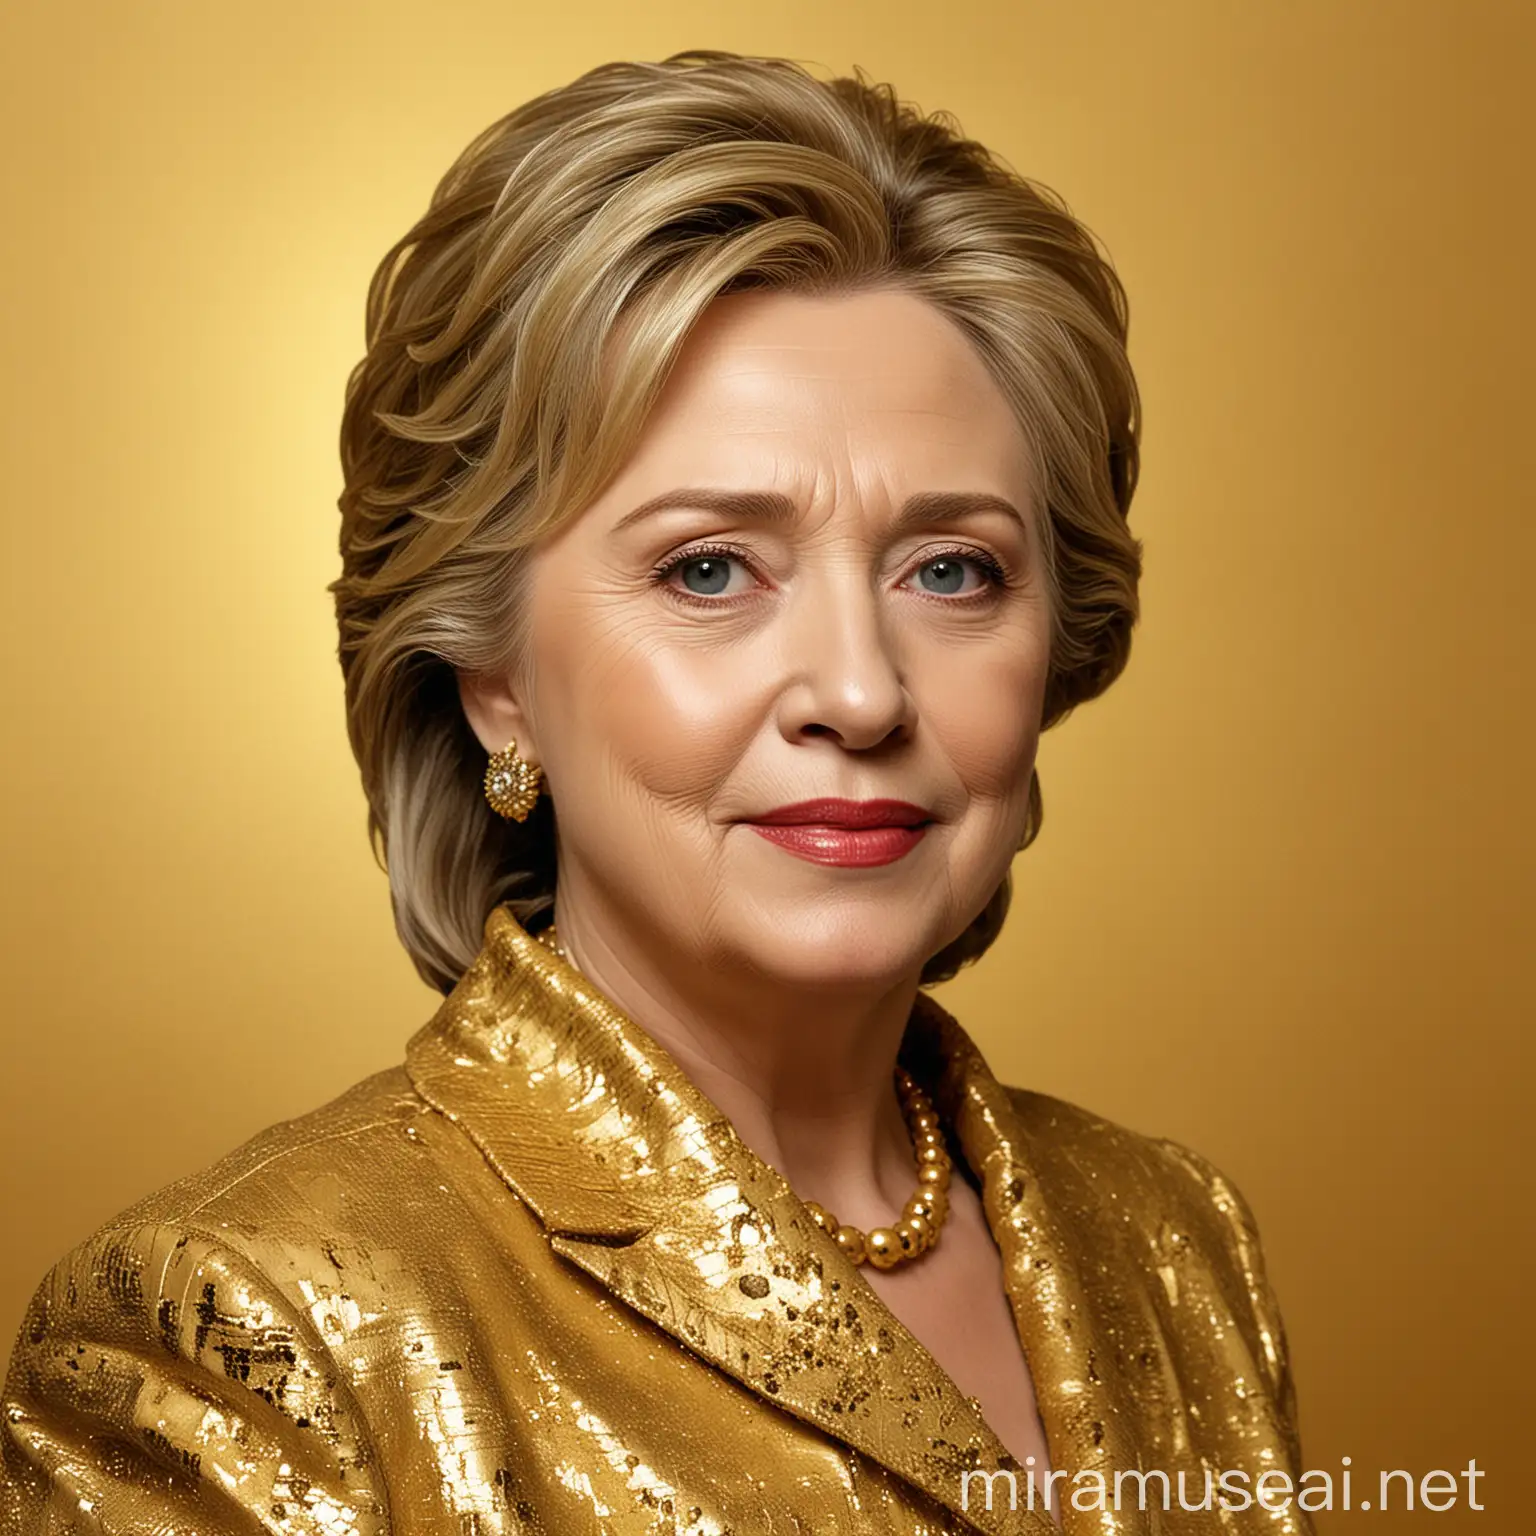 Hilary Clinton Portrait in Gold Background